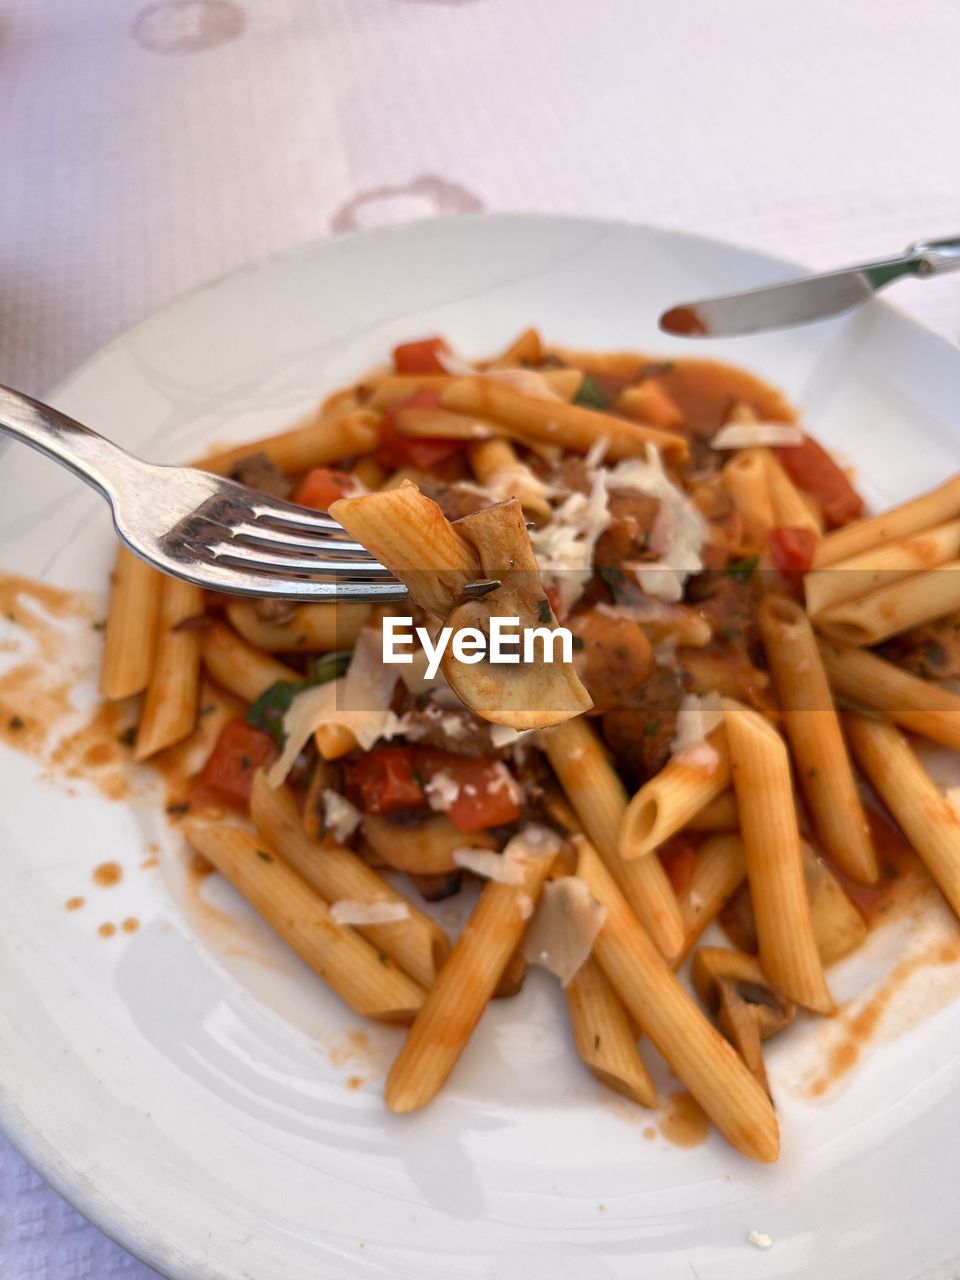 A pasta dish with meat and mushrooms